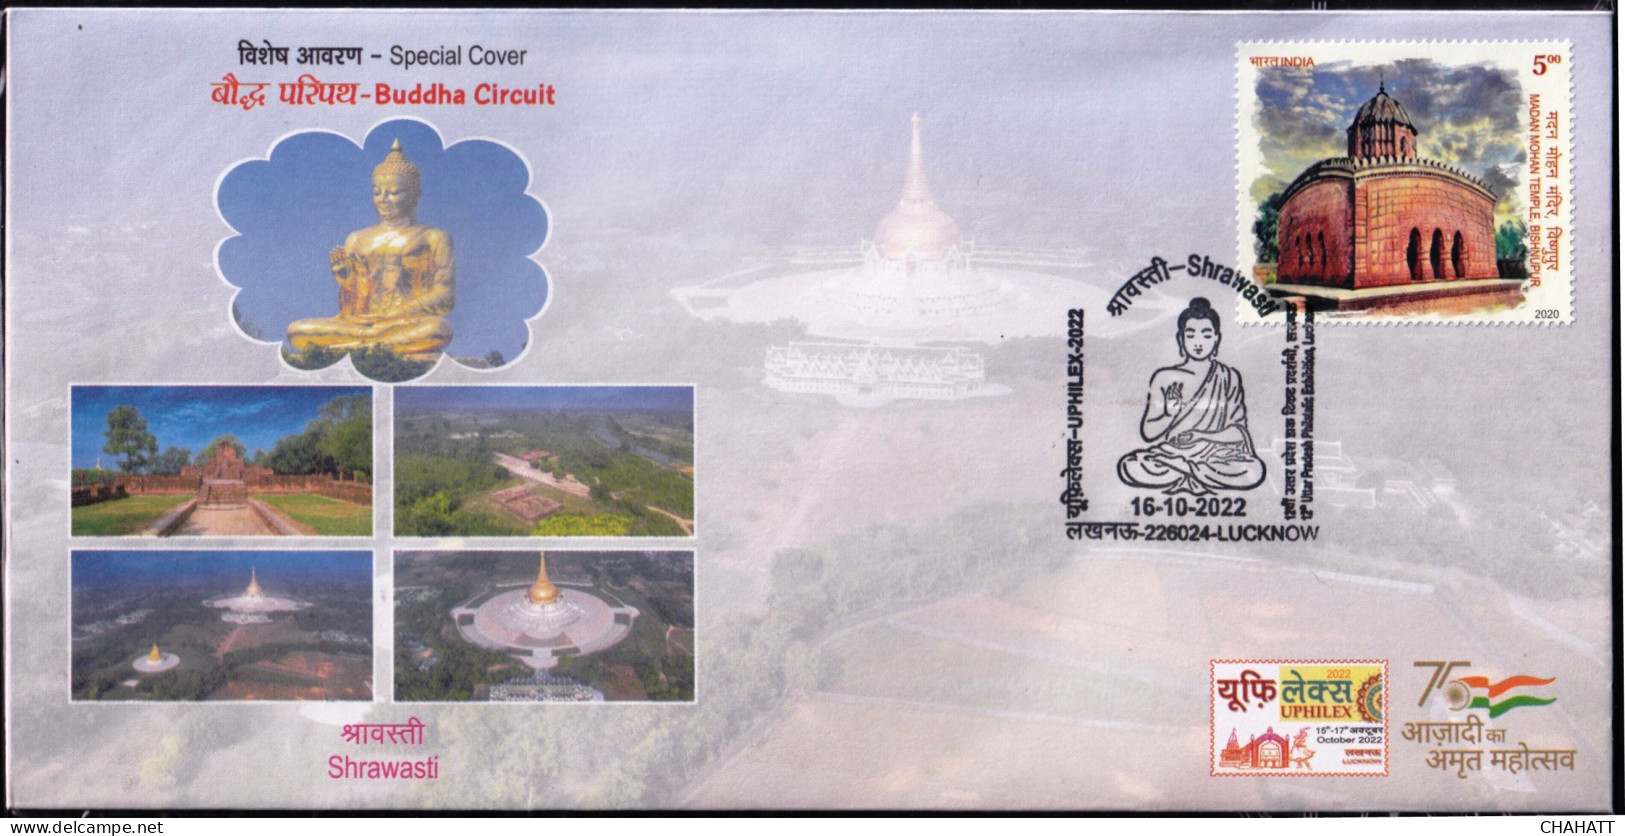 BUDDHISM- SHRAWASTI - BUDDHA CIRCUIT - PICTORIAL CANCELLATION - SPECIAL COVER - INDIA -2022- BX4-24 - Bouddhisme